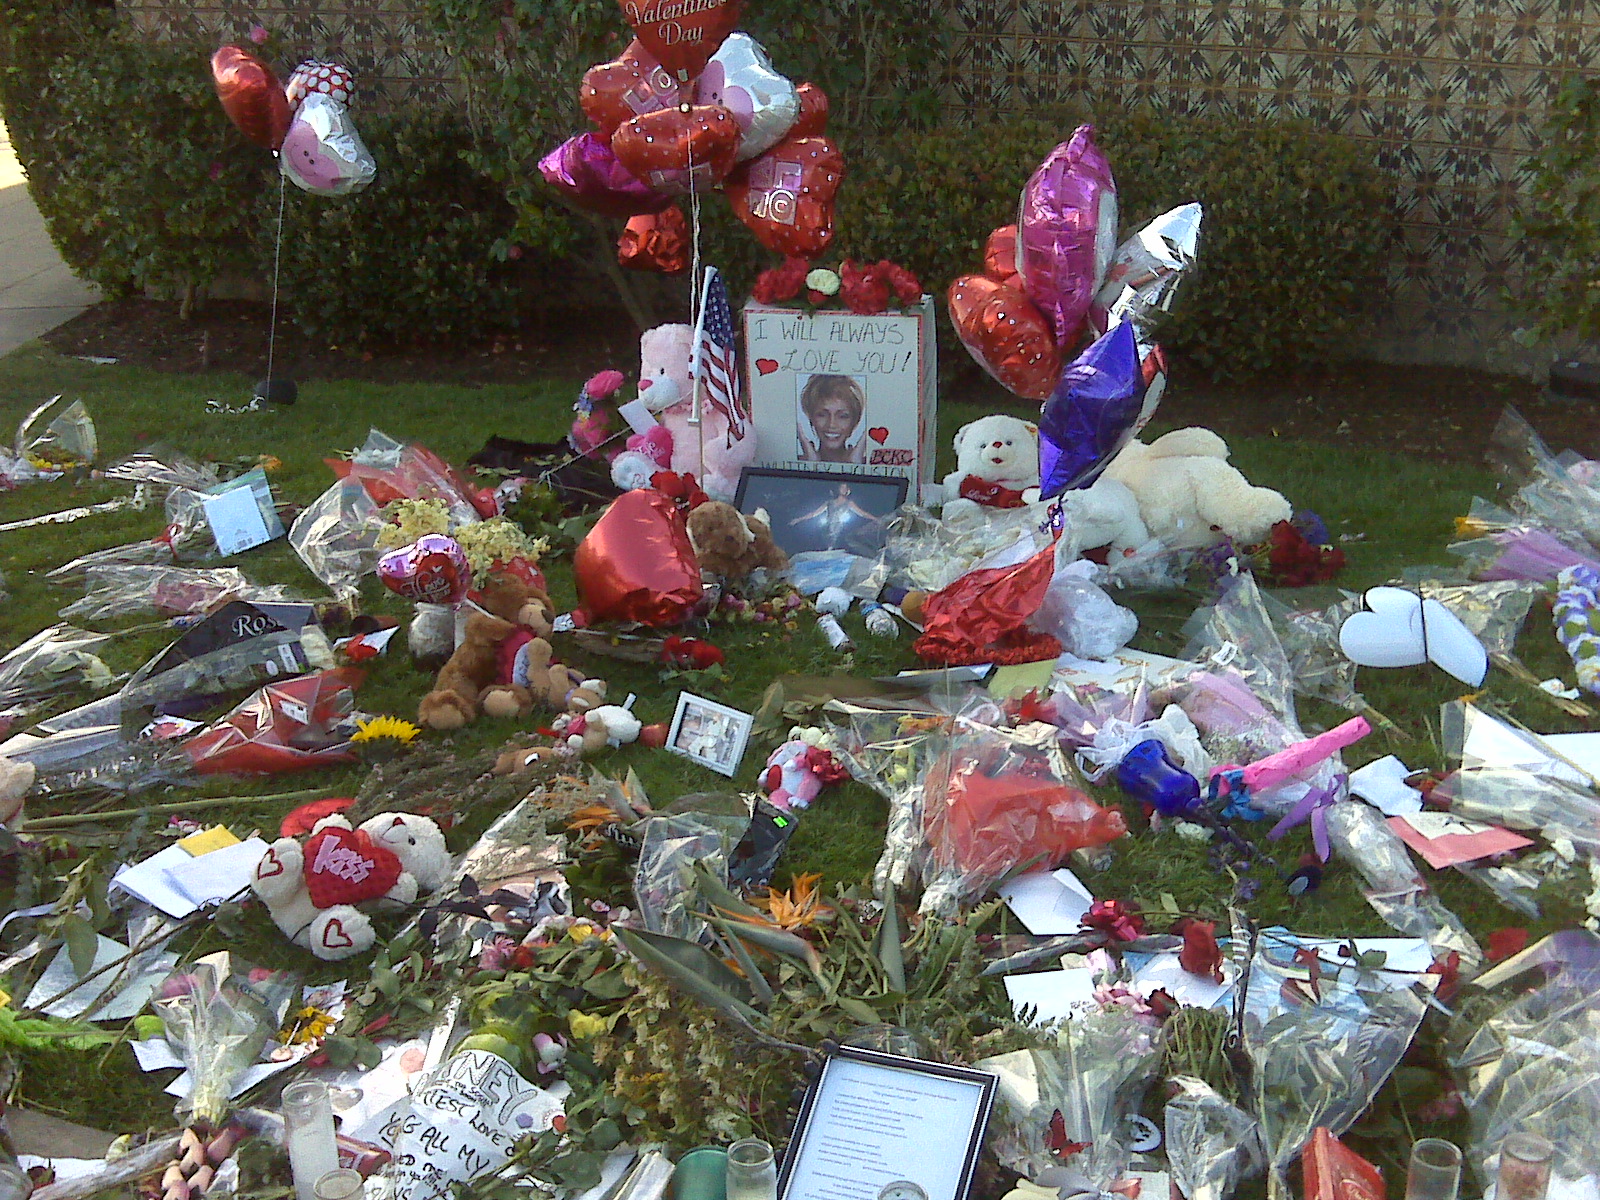 Whitney Houston, The Queen of Pop: Makeshift Memorial at the Beverly Hills Hotel Where Whitney Houston Was Found Dead in Her Hotel Room, Luxury Suite #434